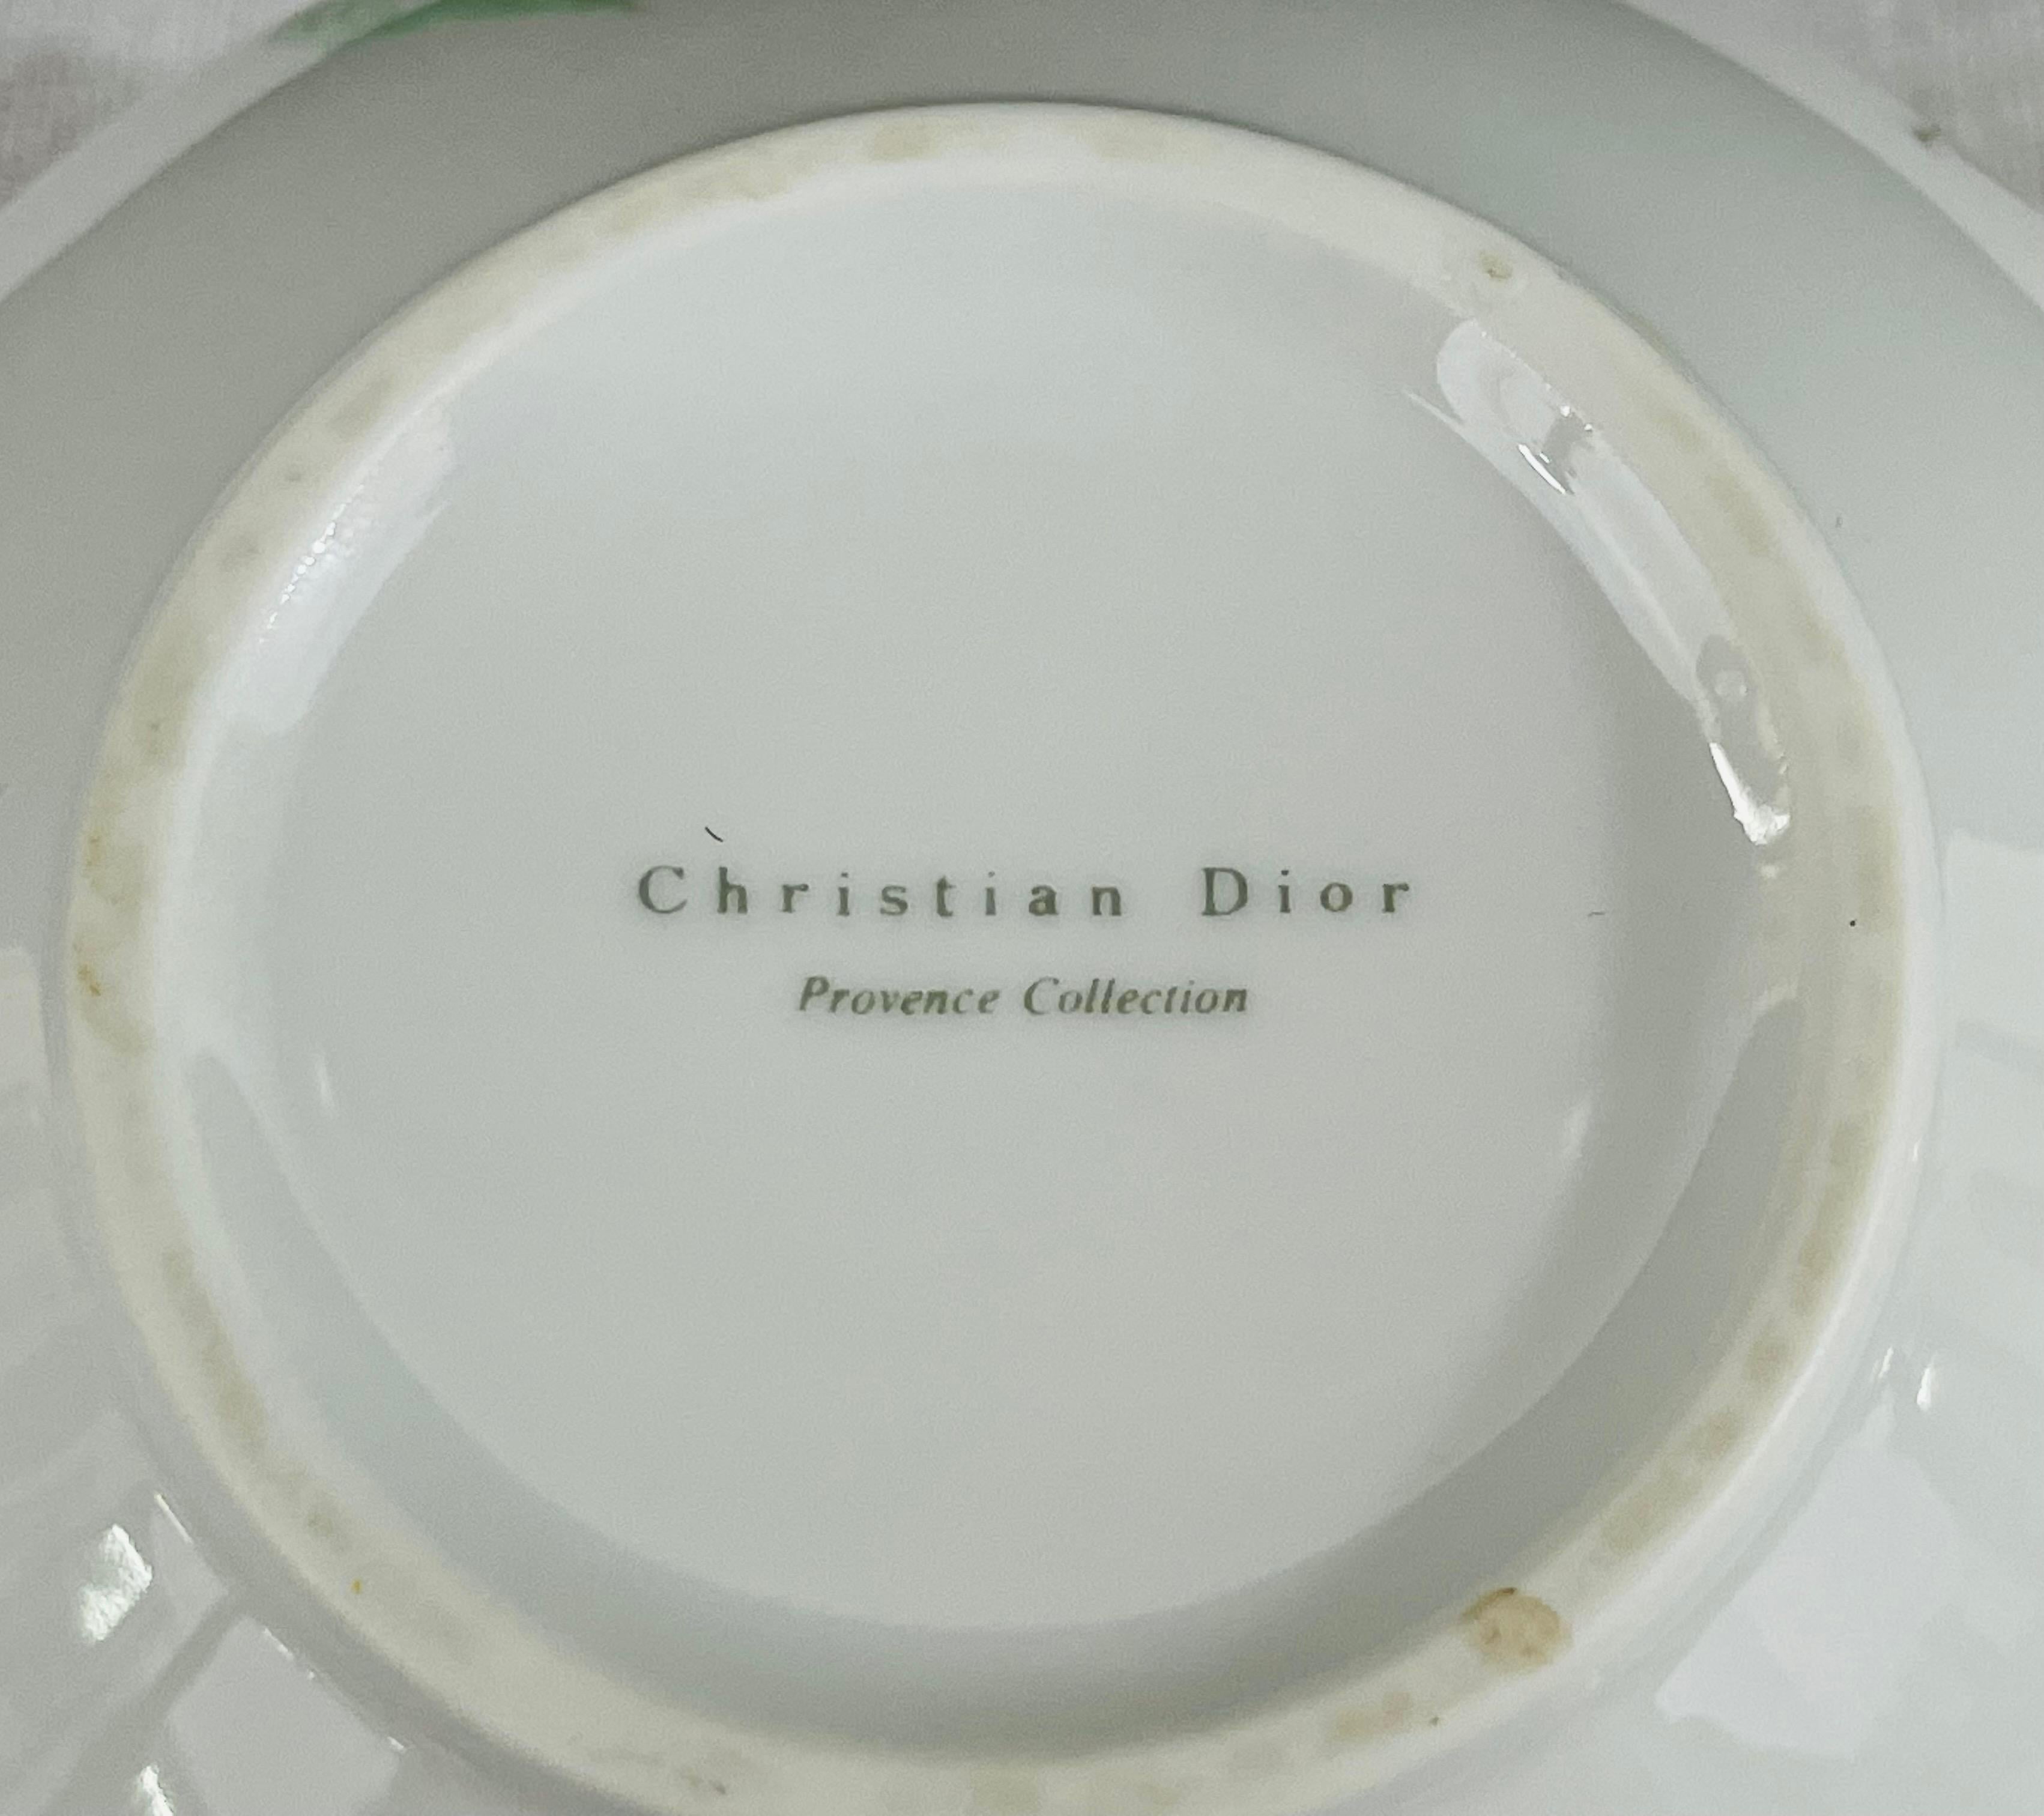 20th Century Christian Dior Provence Collection Porcelain Sugar Bowl and Creamer, Set of 2 For Sale